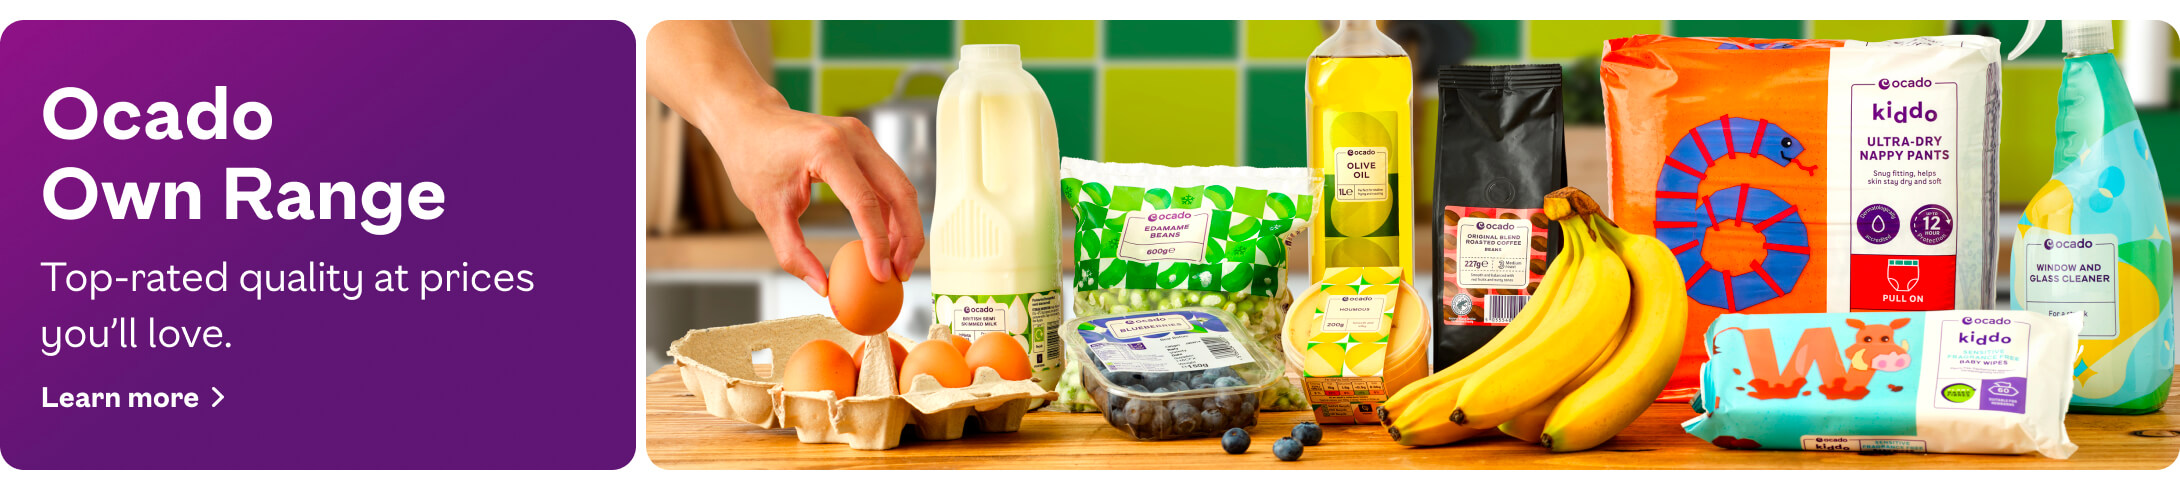 Ocado Own Range - Top-rated quality at prices you'll love.